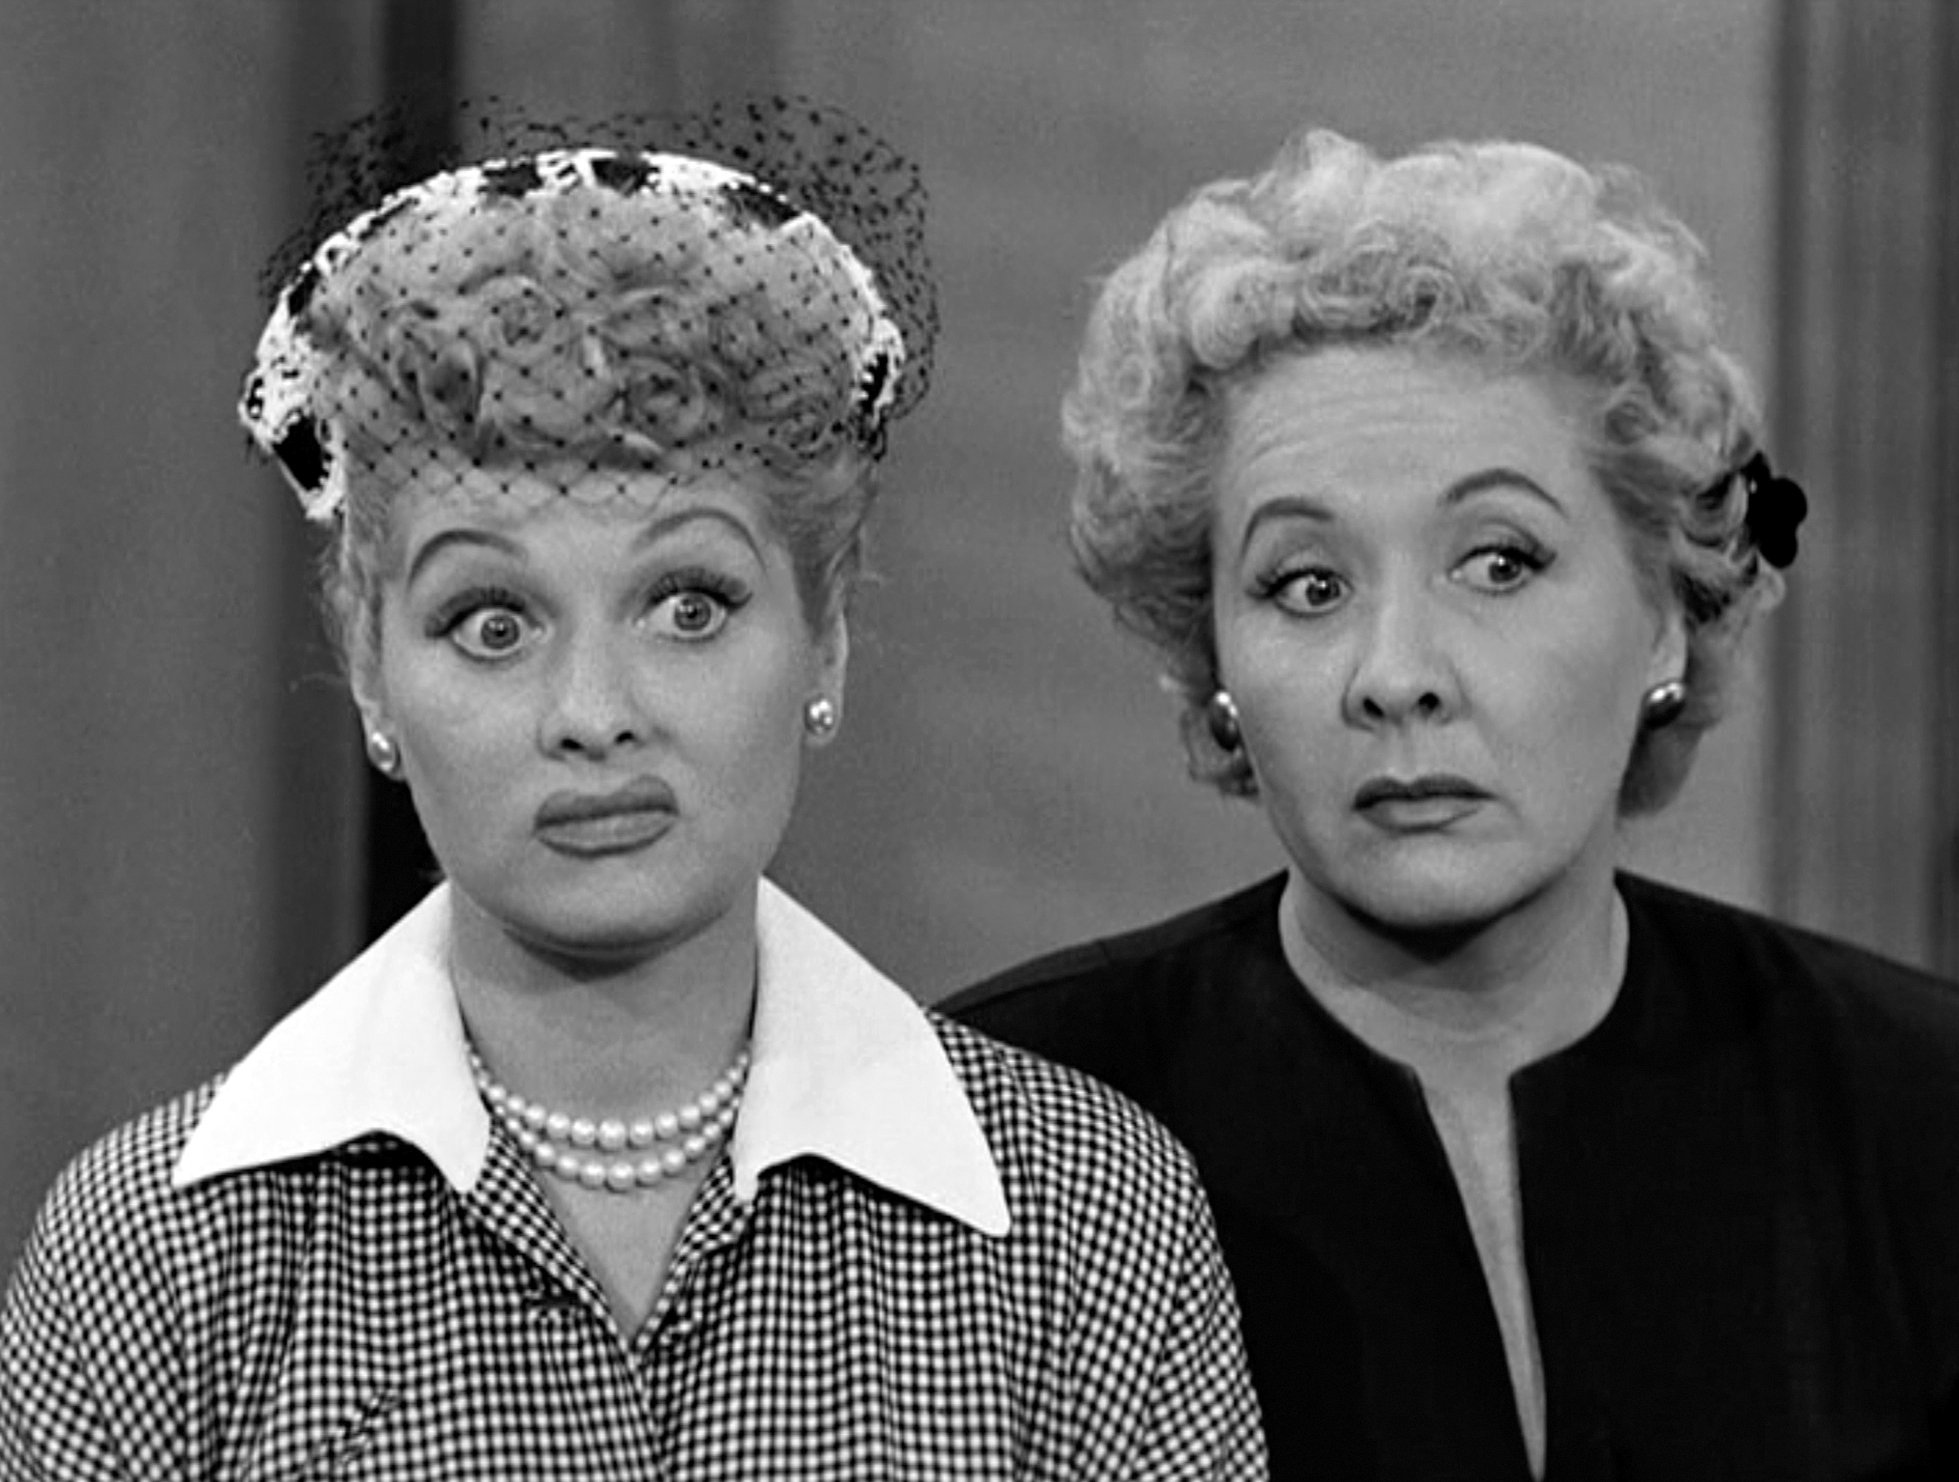 Why I Love Lucy The Movie Remained Unreleased For Decades